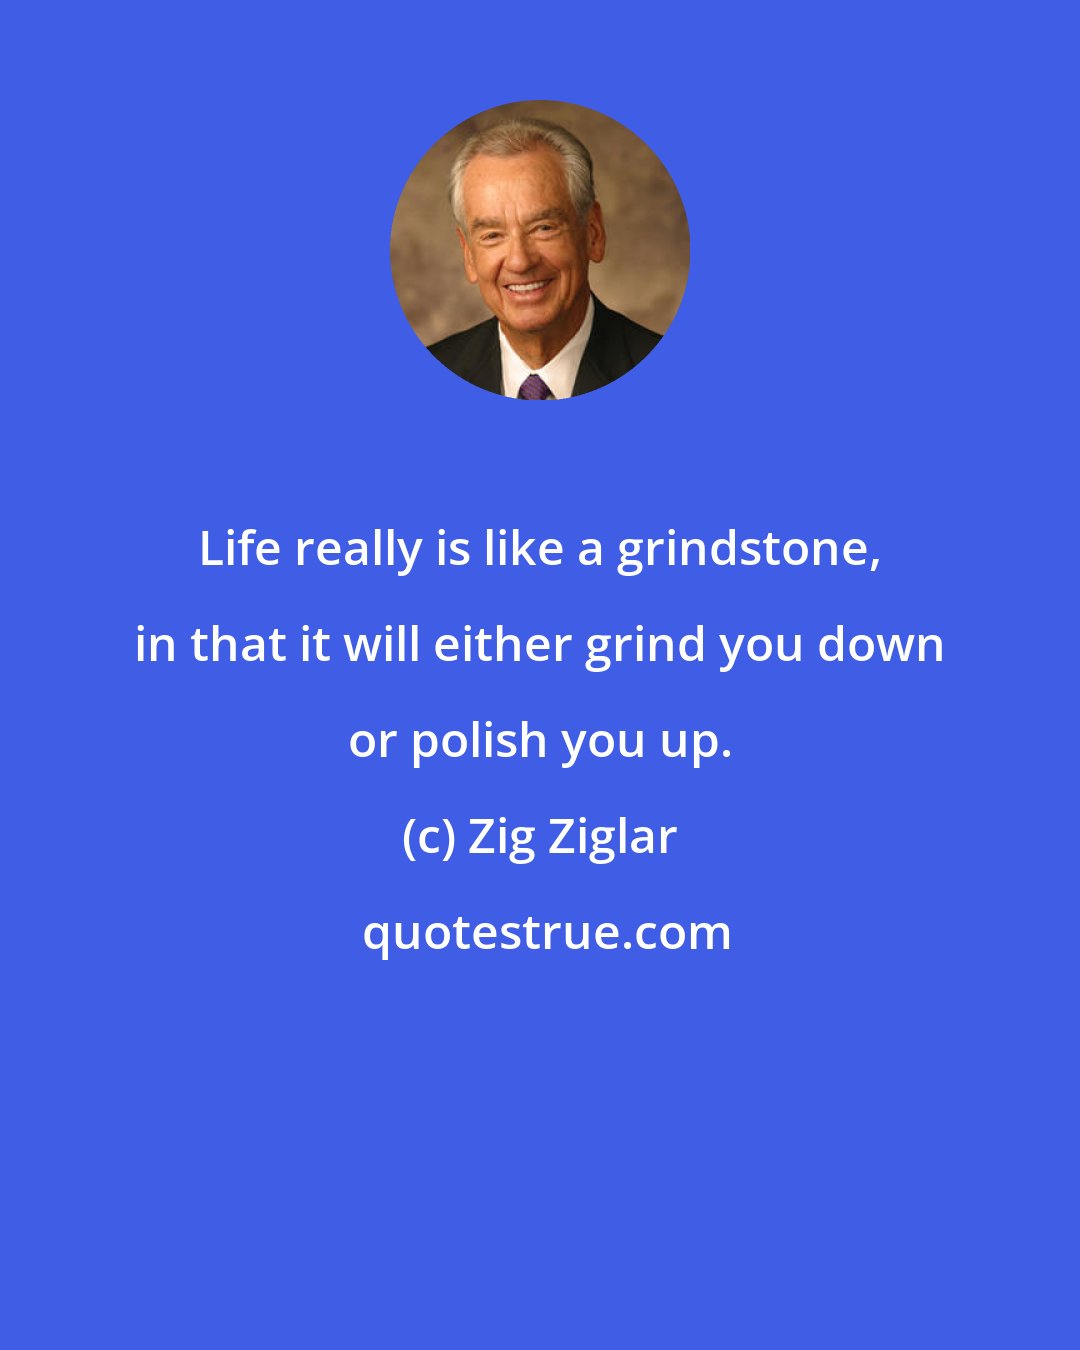 Zig Ziglar: Life really is like a grindstone, in that it will either grind you down or polish you up.